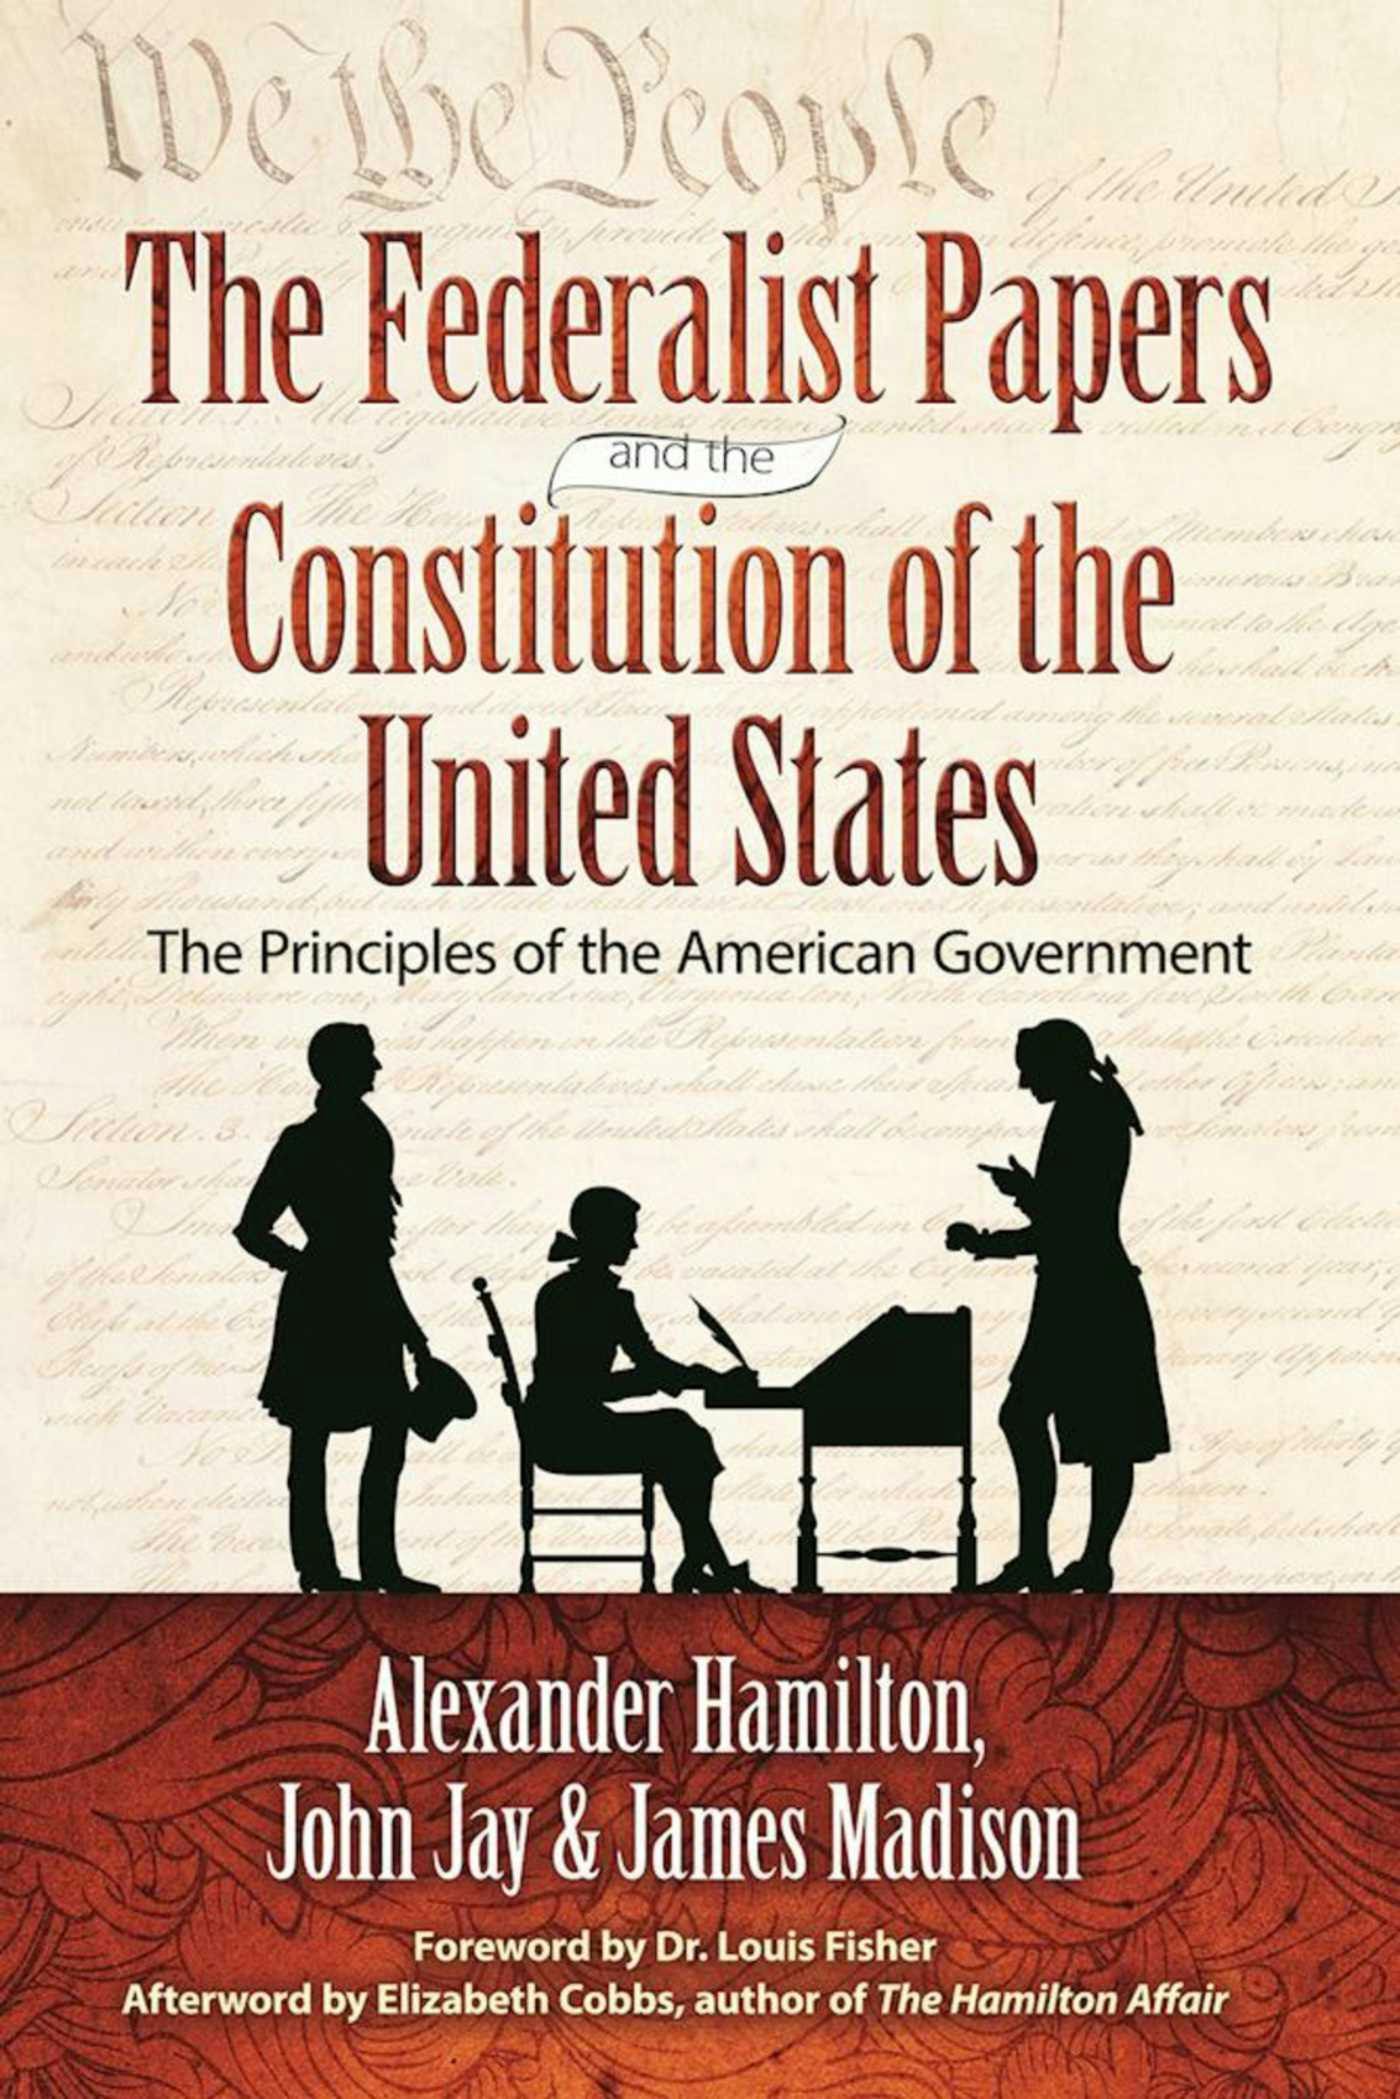 The Federalist Papers and the Constitution of the United States: The Principles of the American Government - undefined